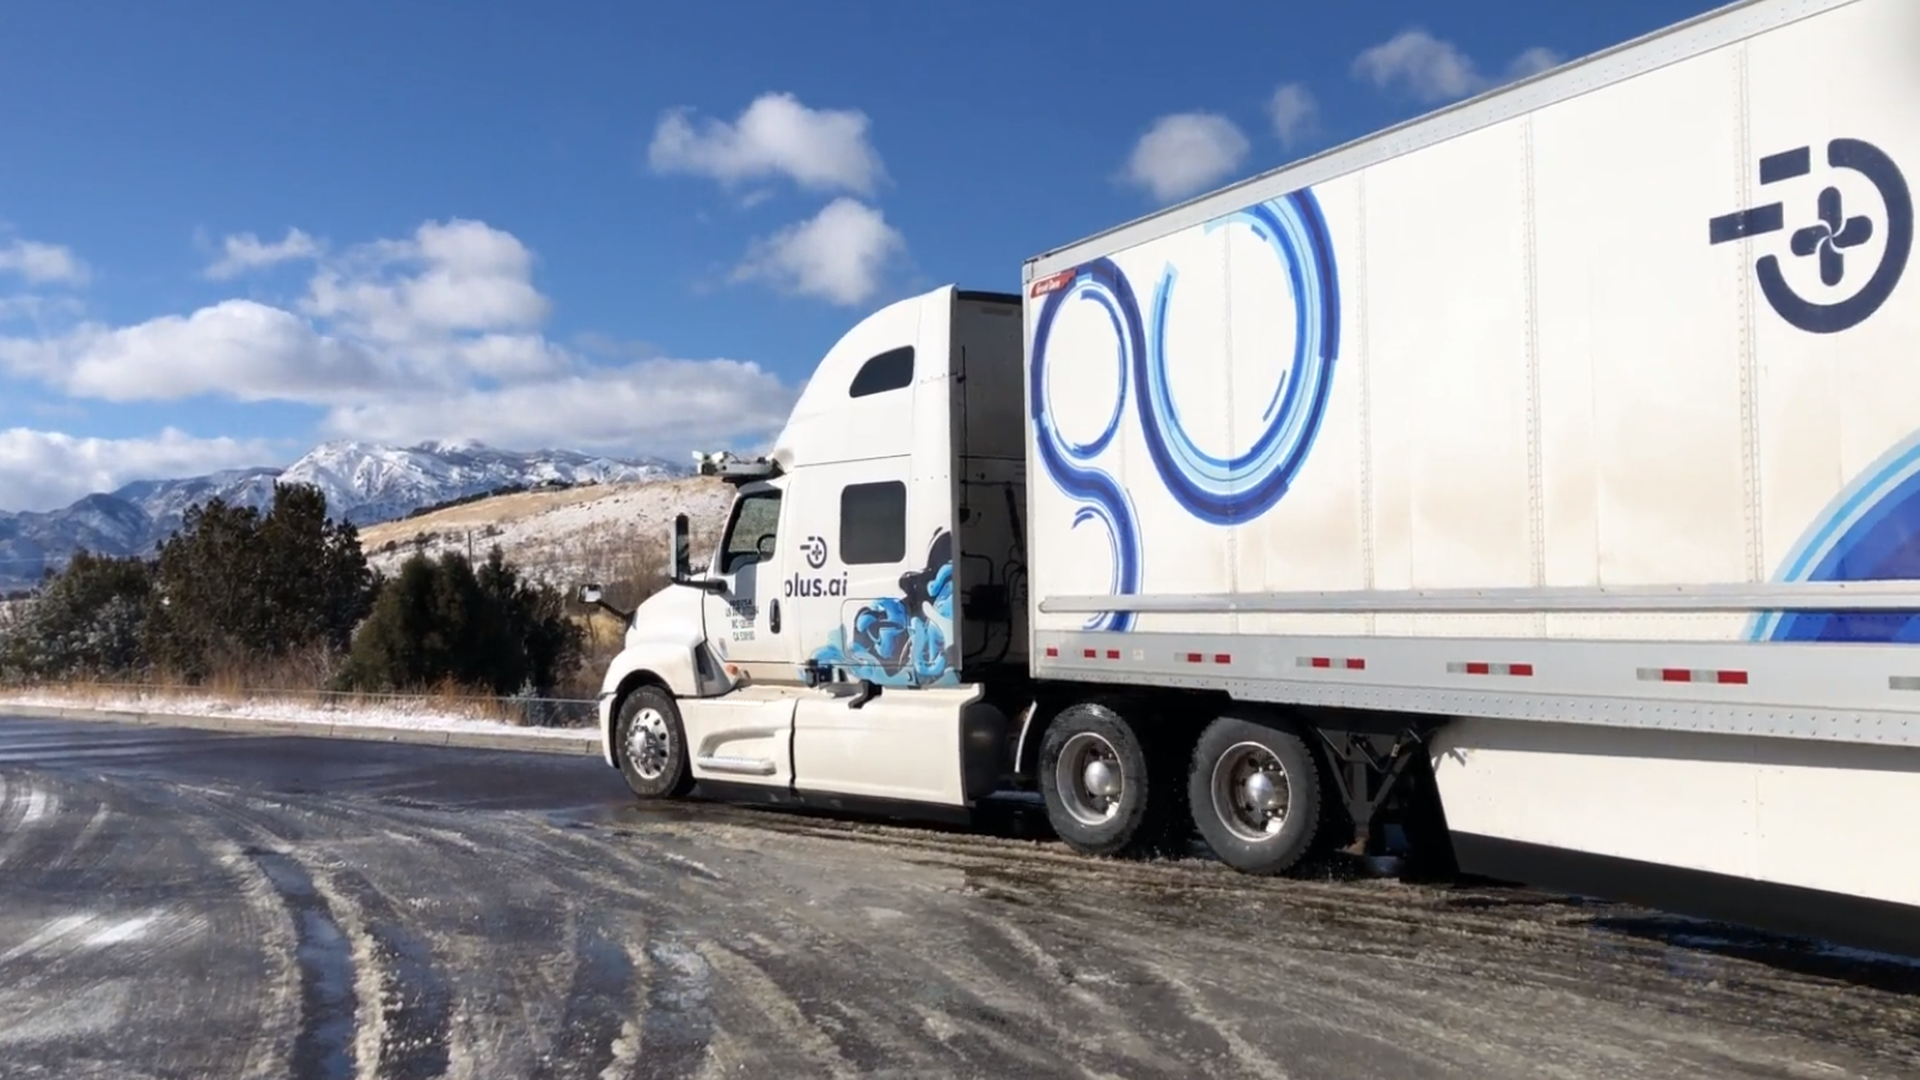 Image of Plus.ai self-driving truck on ice-covered road